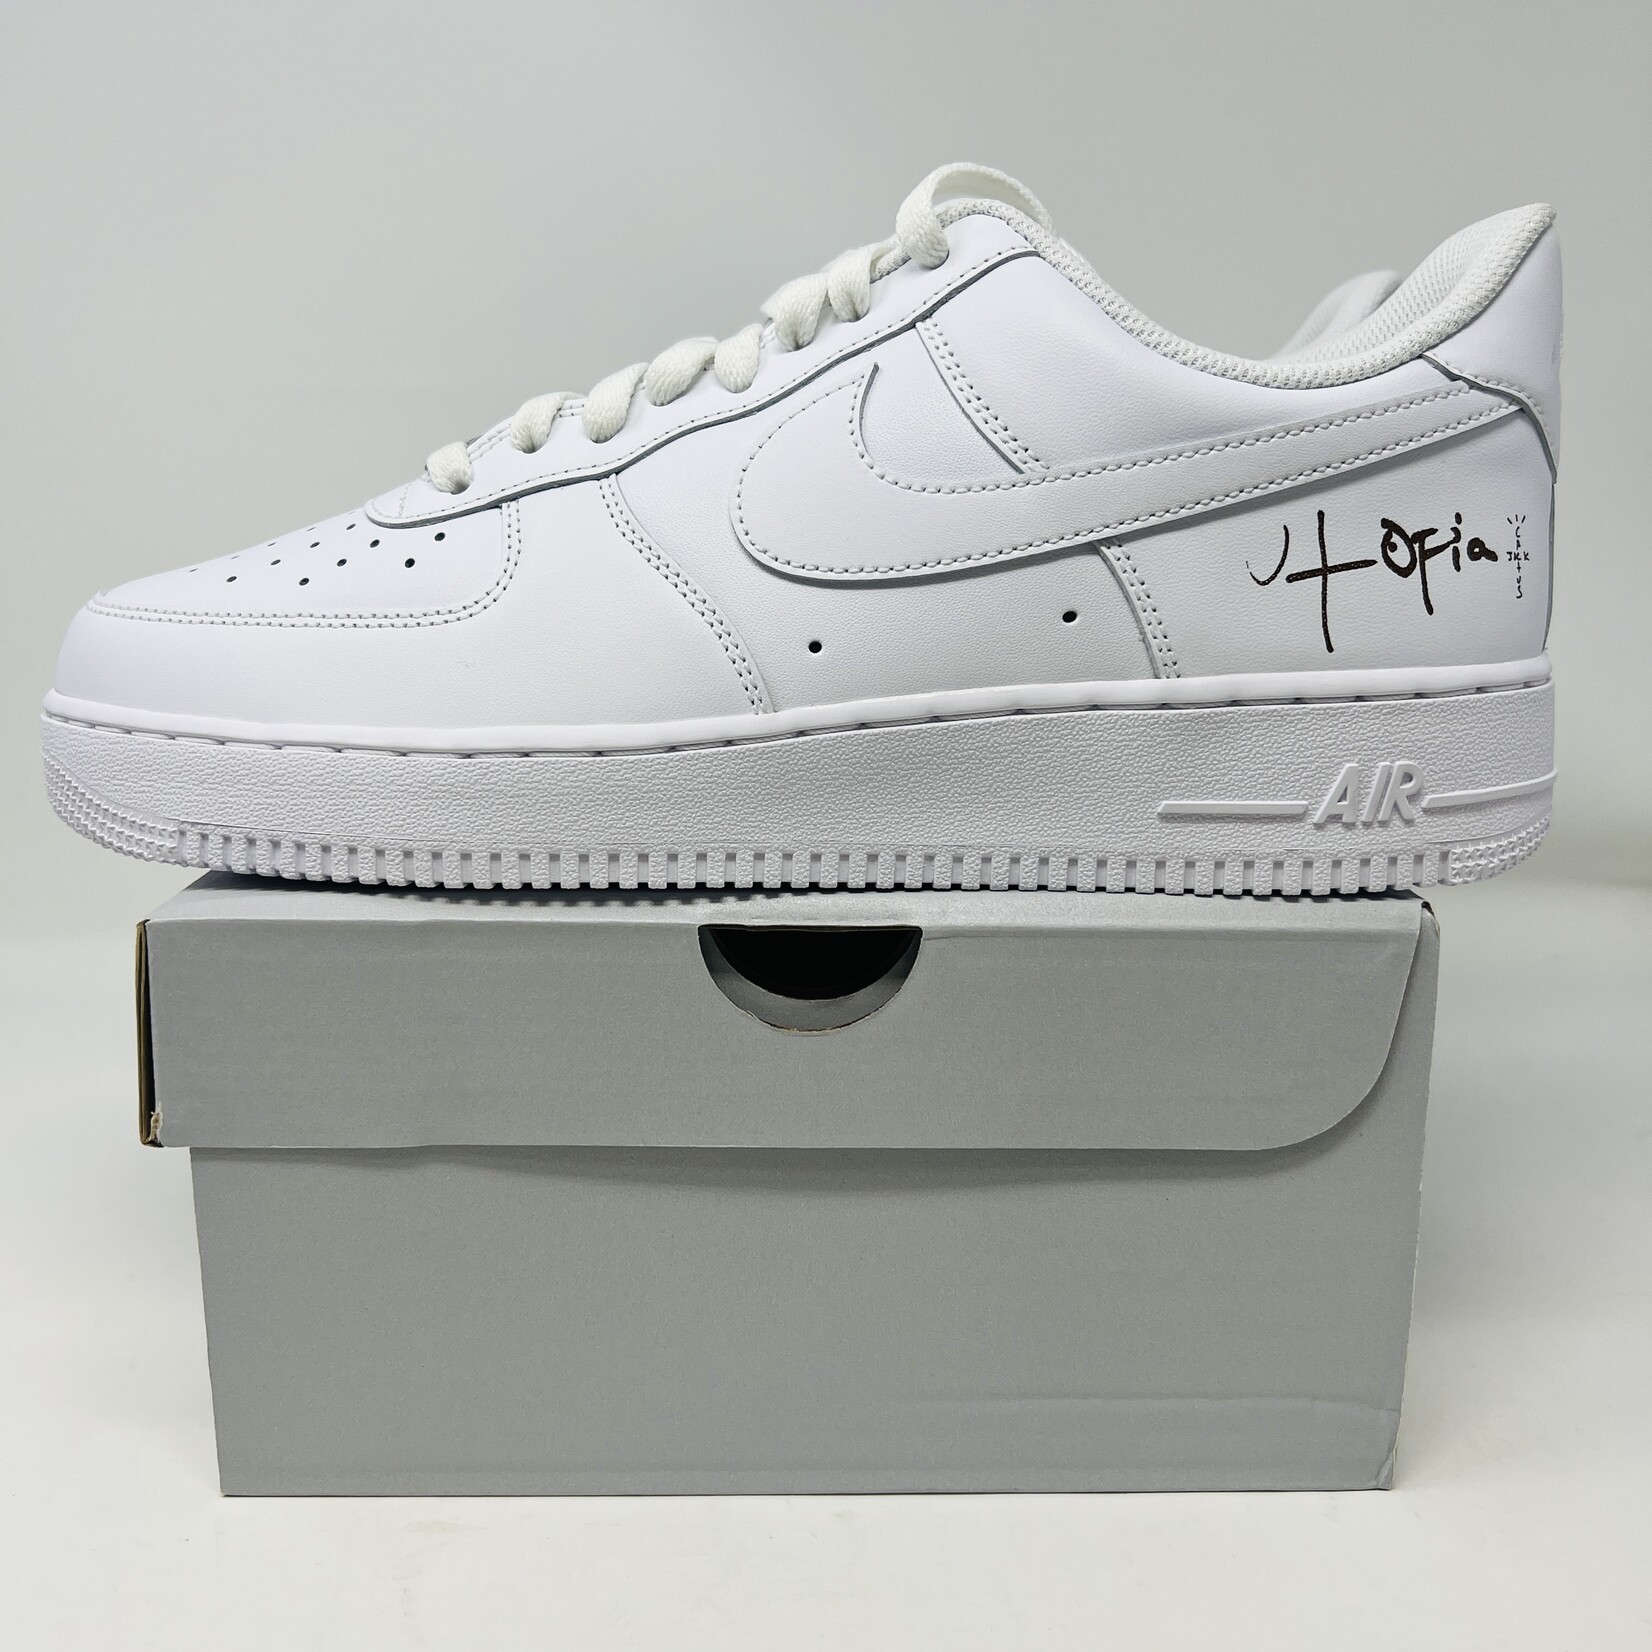 Nike Air Force 1 Low '07 Black White for Sale, Authenticity Guaranteed